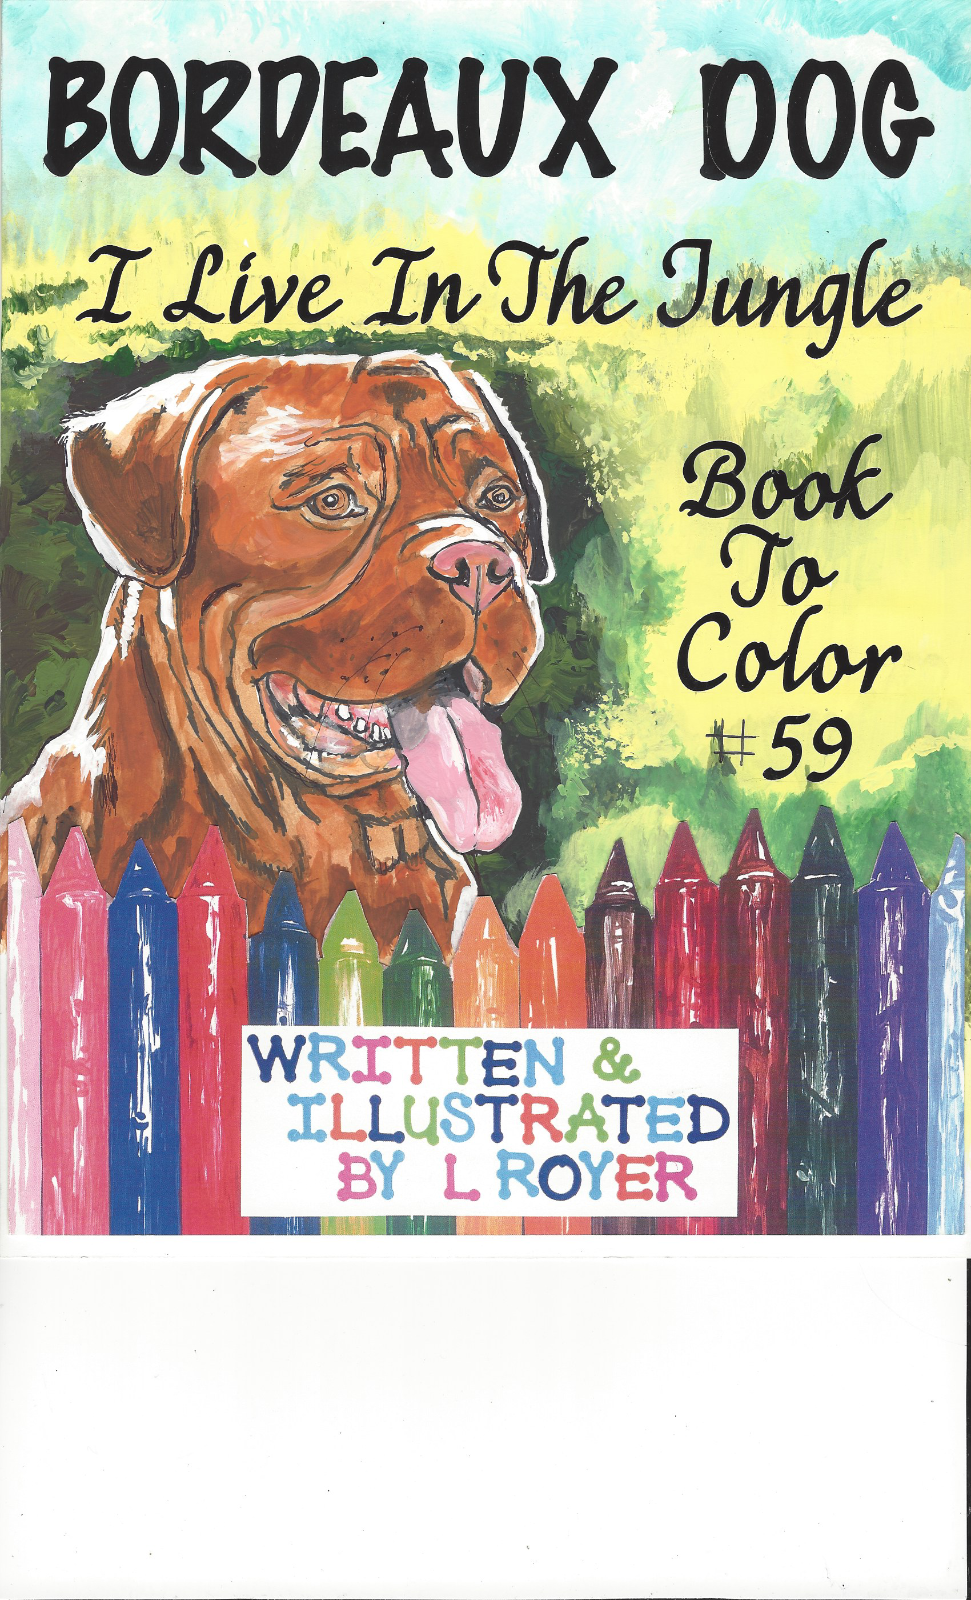 BORDEAUX DOG ART COLORING BOOK BY L ROYER  AUTOGRAPHED #59 NEW RELEASE GREAT